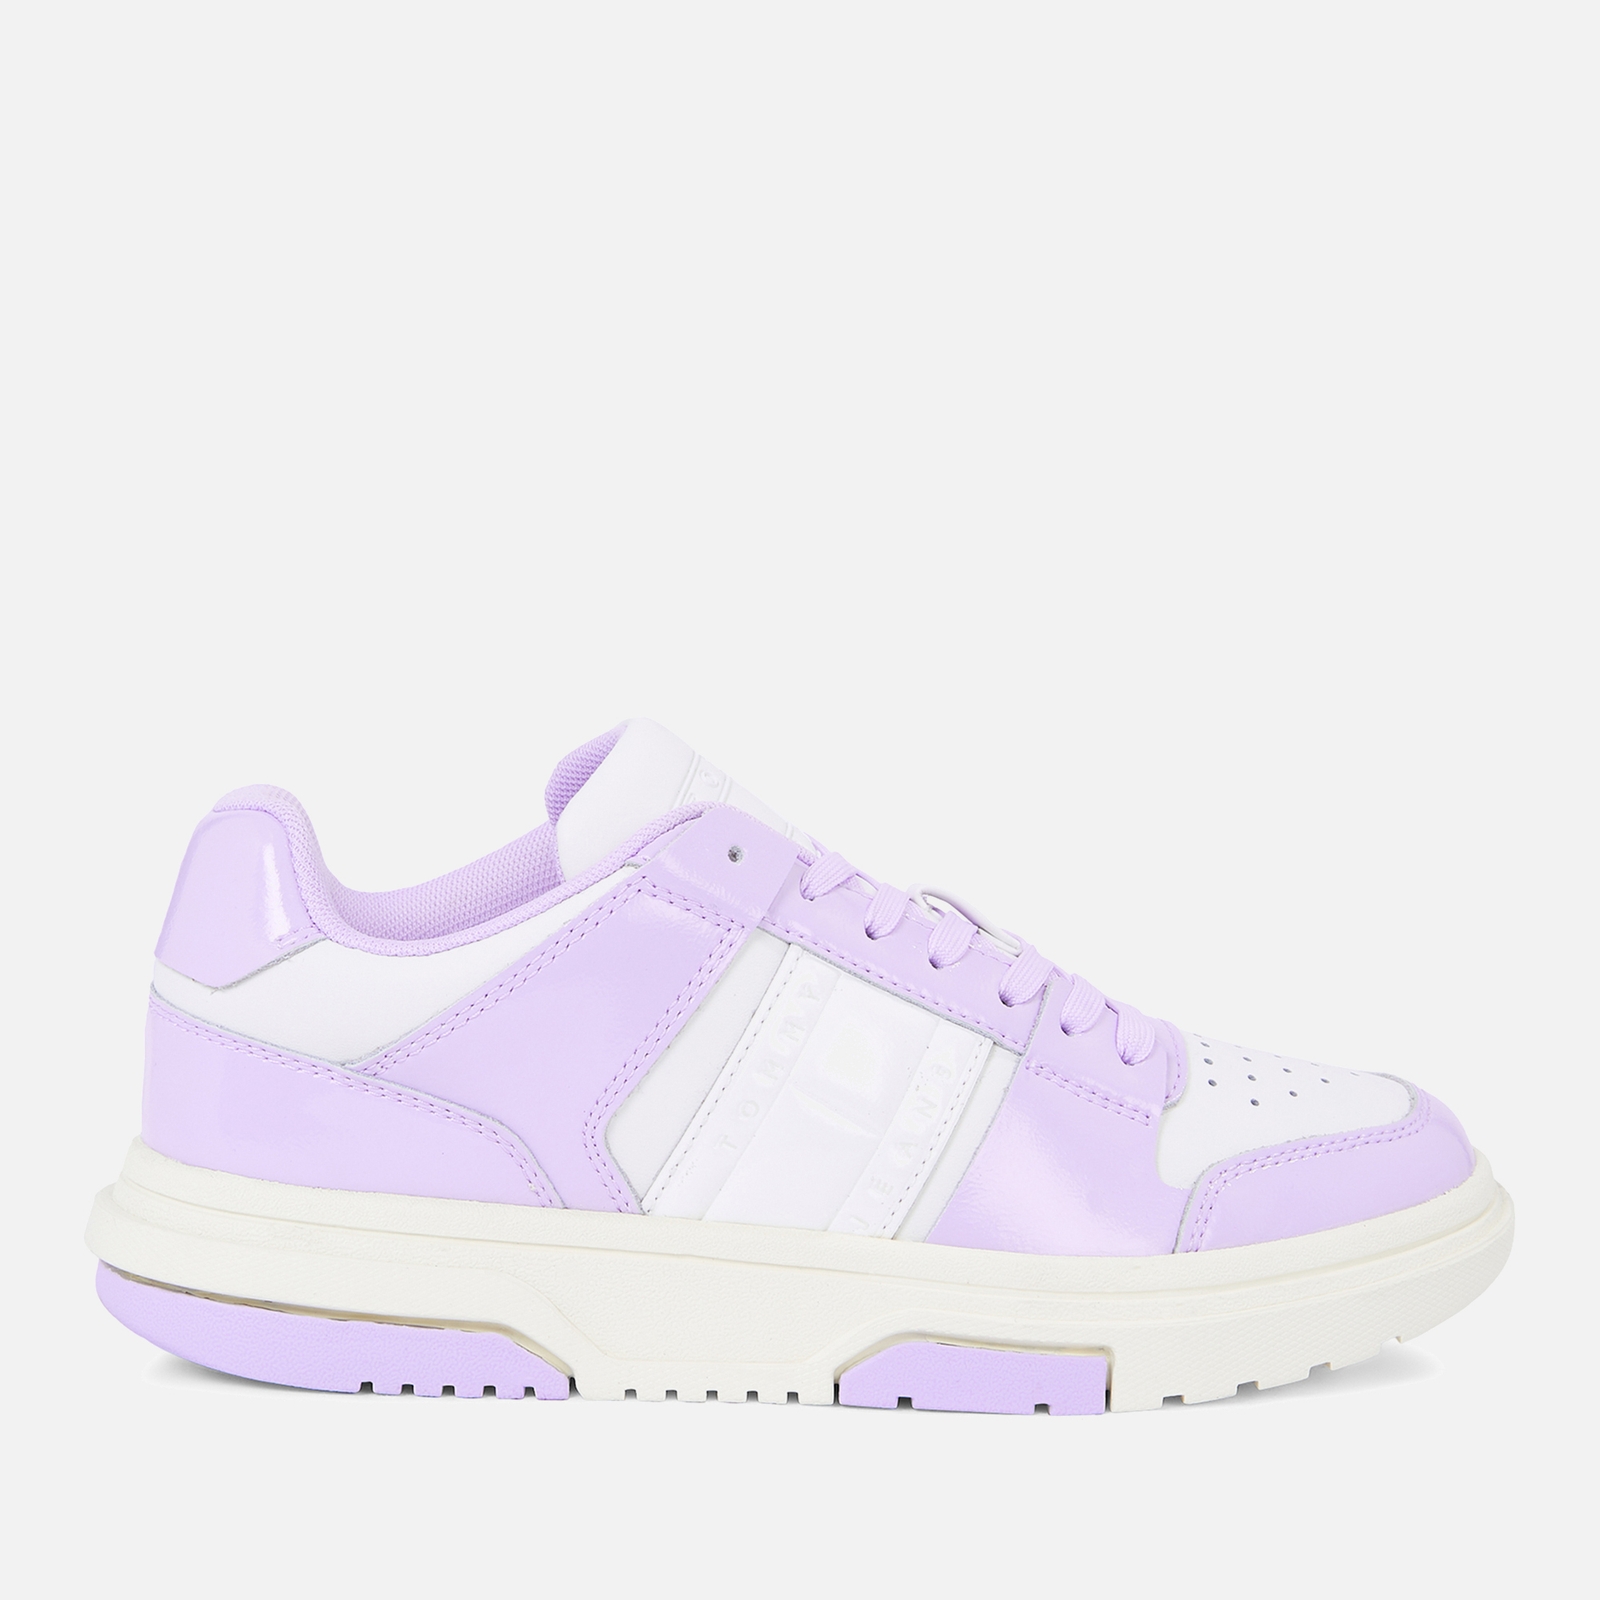 Tommy Jeans Women's Cupsole Trainers - Lavender Flower